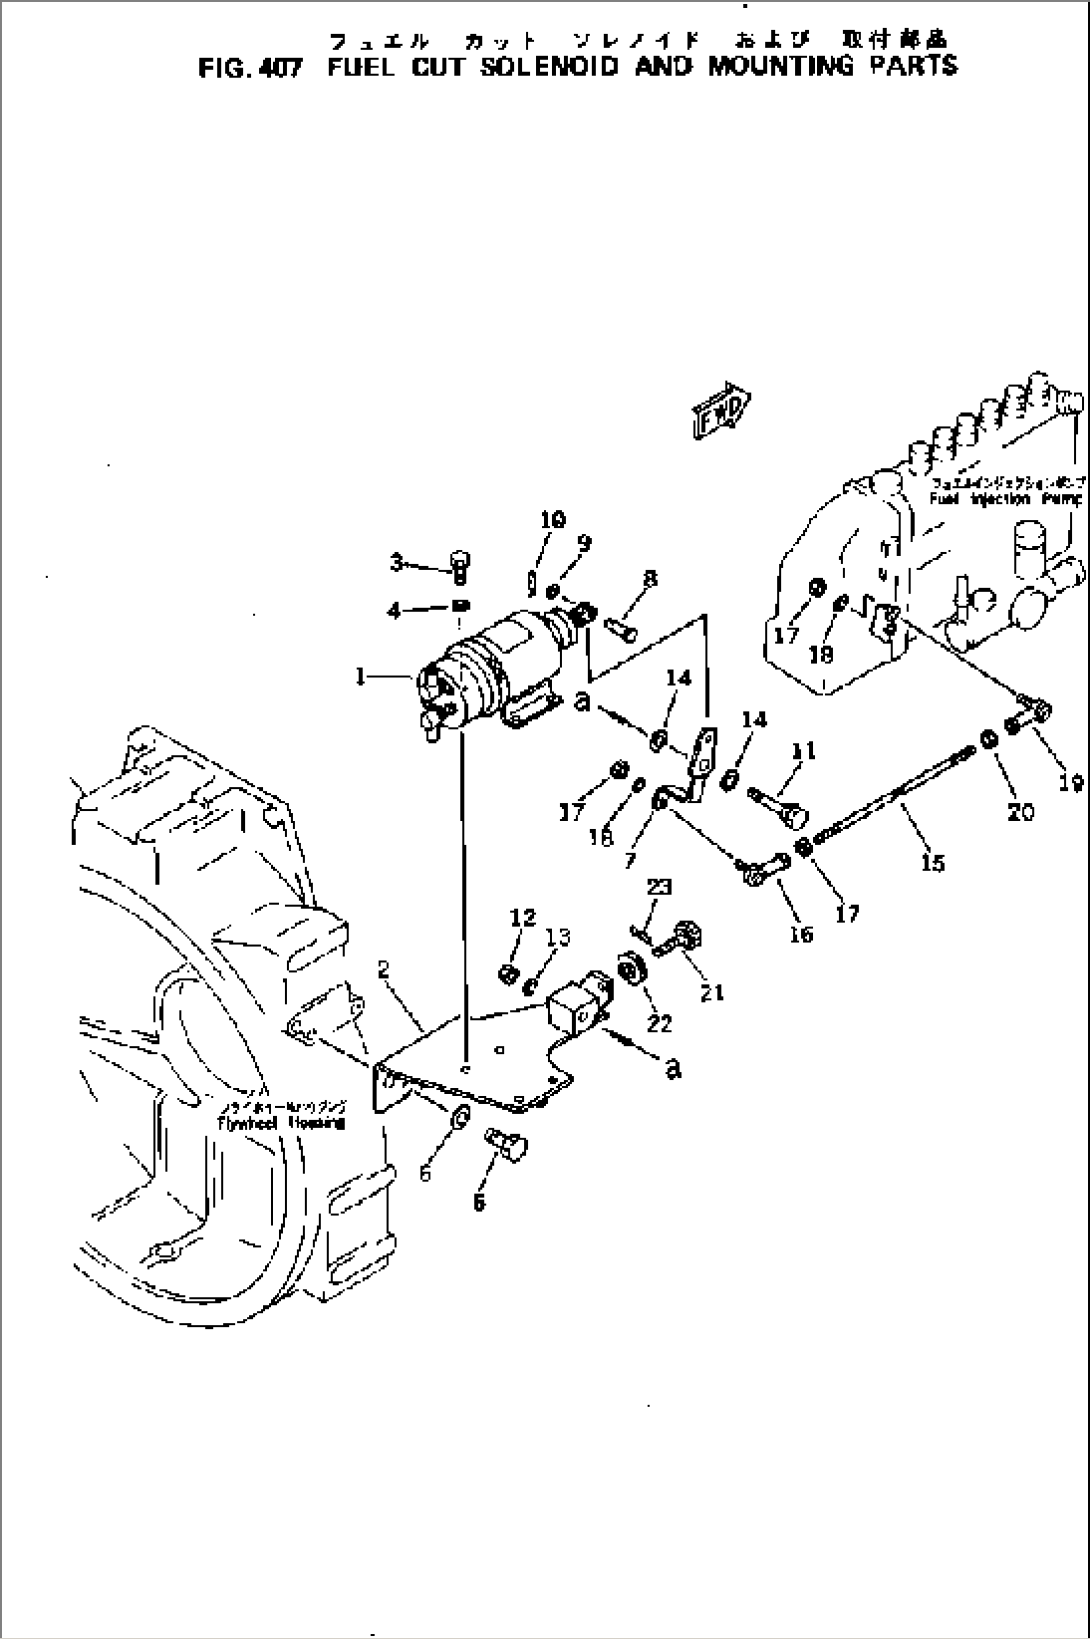 FUEL CUT SOLENOID AND MOUNTING PARTS